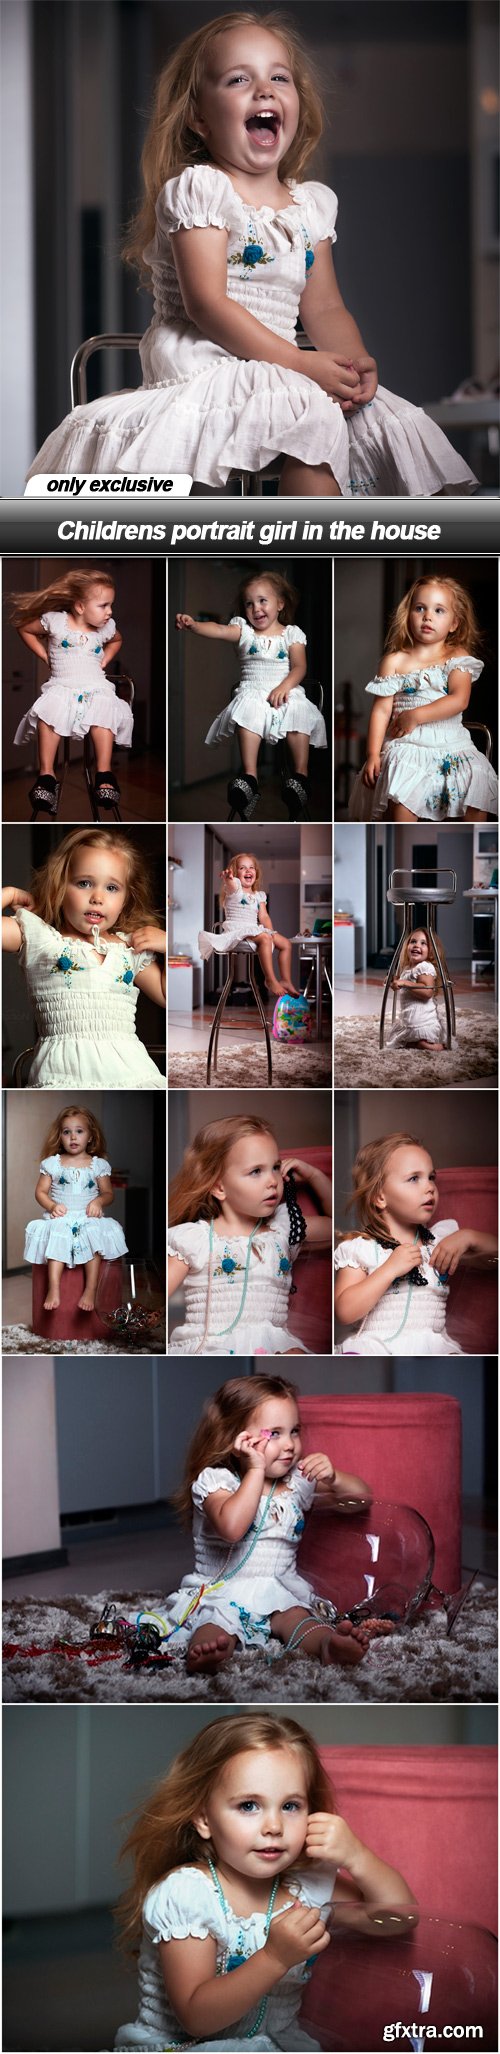 Childrens portrait girl in the house - 12 UHQ JPEG